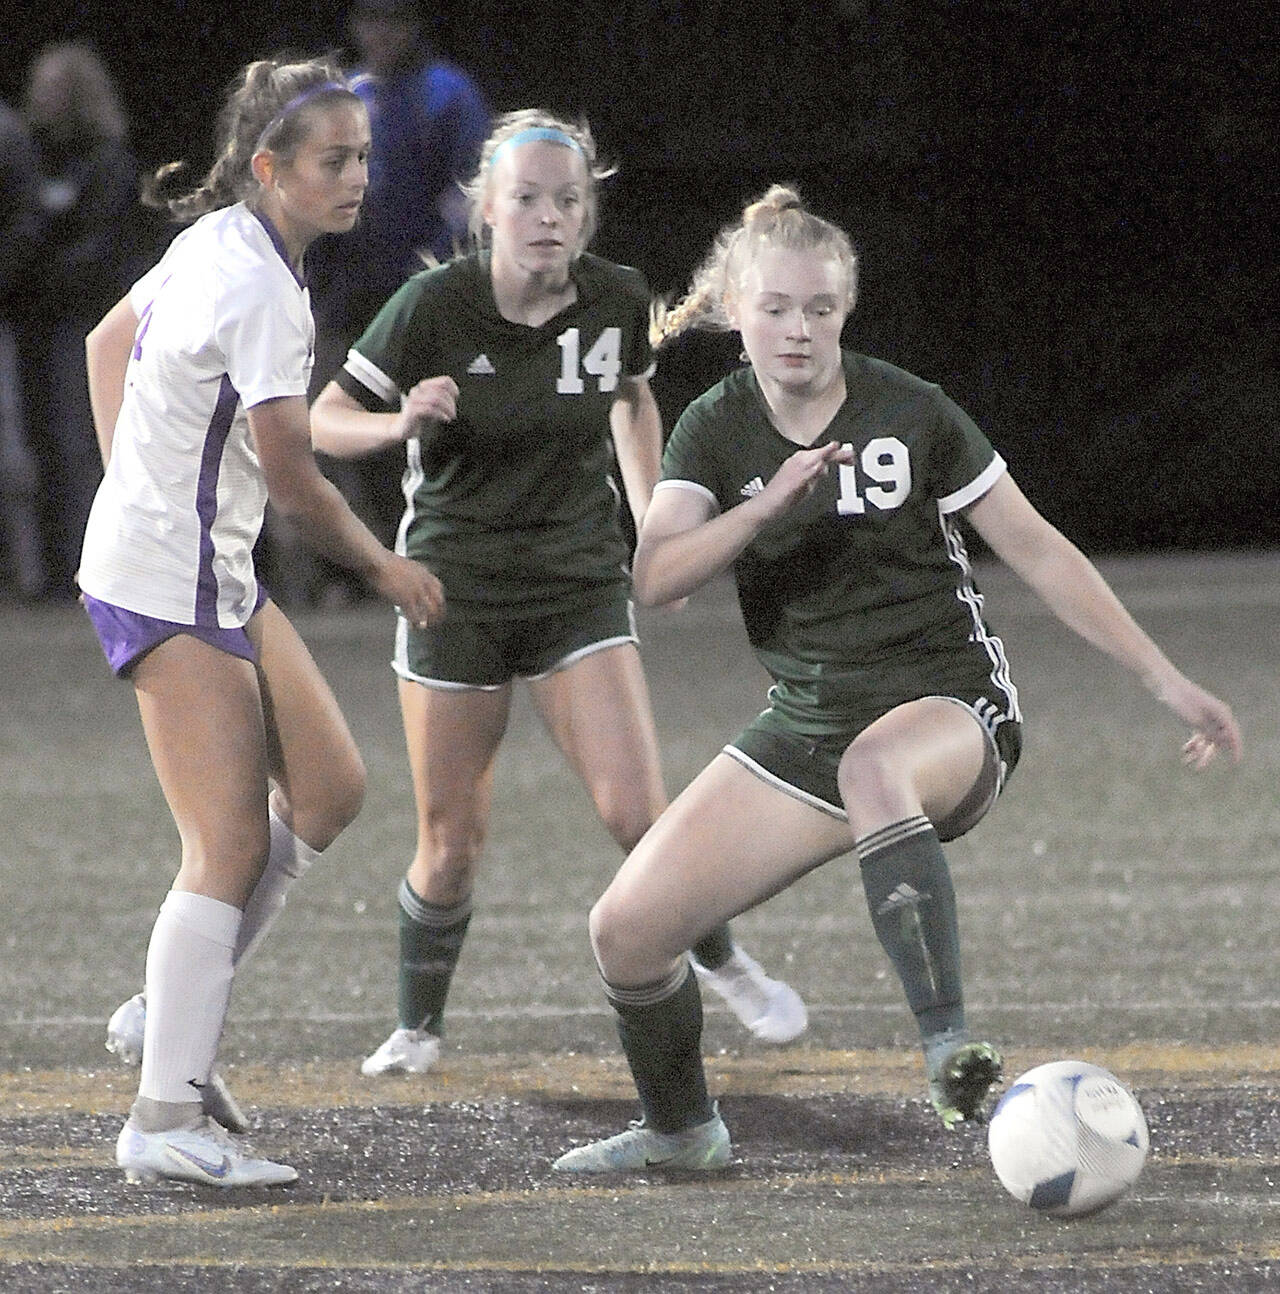 Port Angeles’ Paige Mason, right, slips past North Kitsap’s Syleena Hogan, left, as teammate Anna Petty looks on during Tuesday’s match at Peninsula College. (Keith Thorpe/Peninsula Daily News)